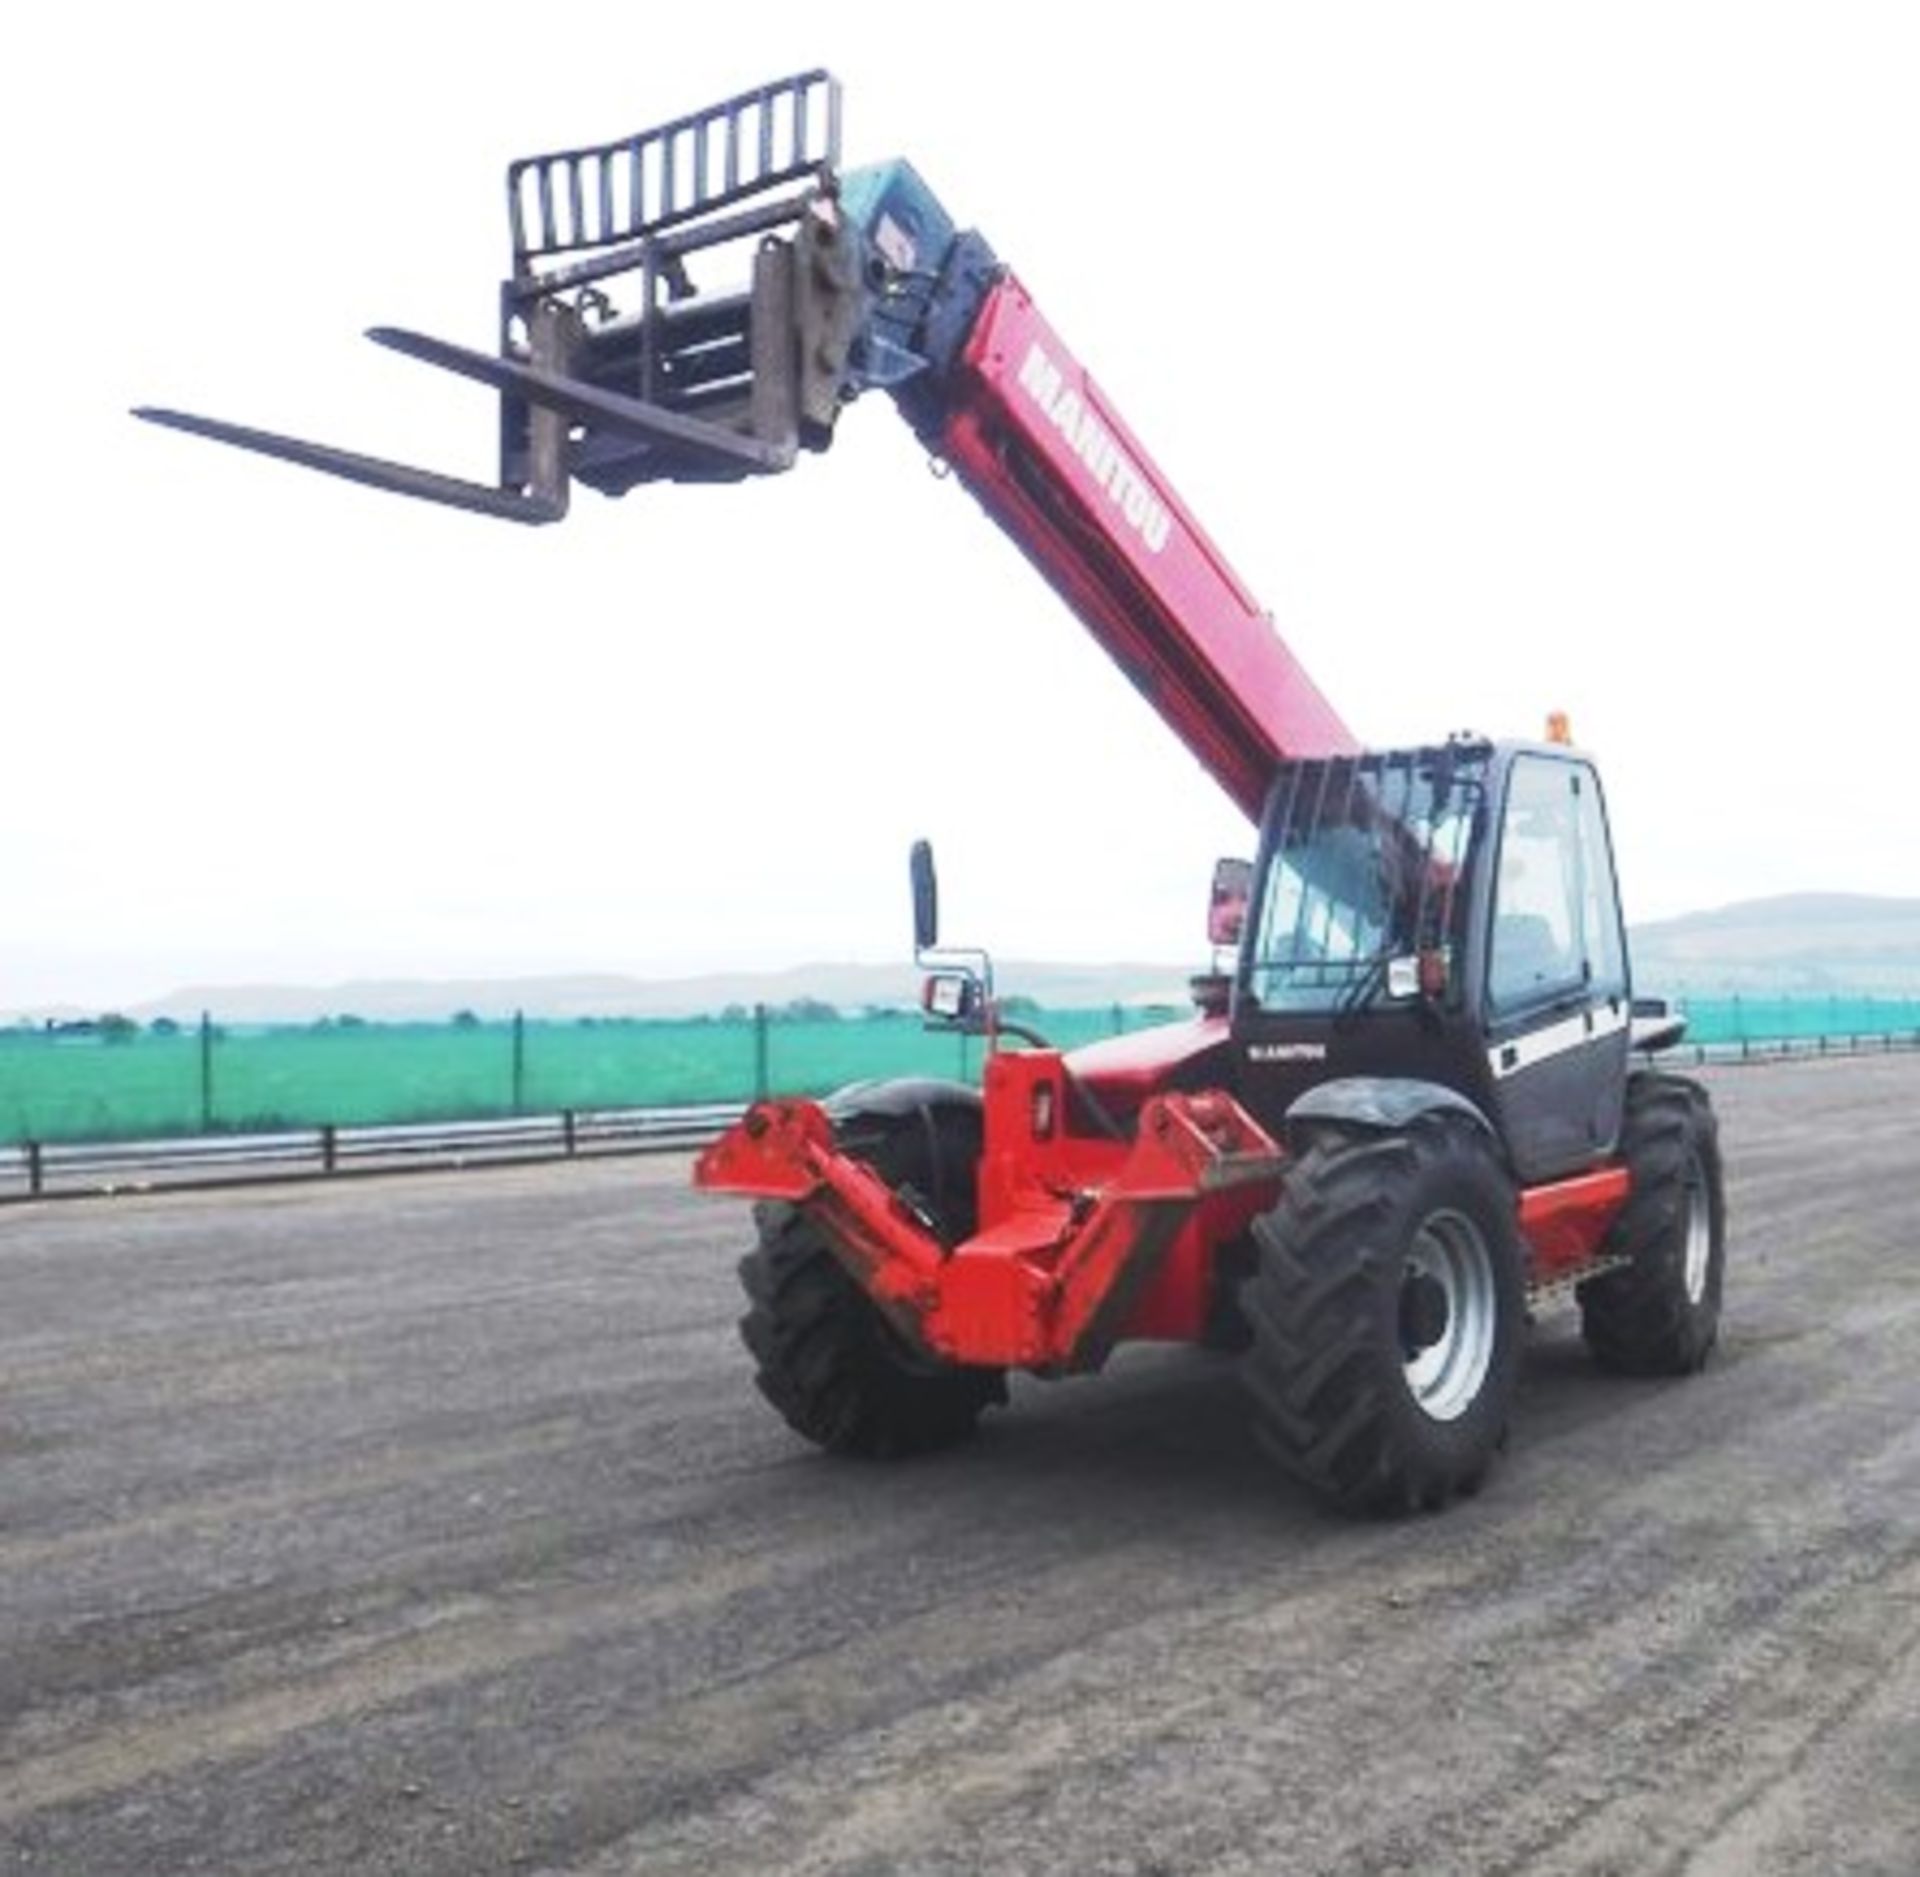 2006 MANITOU 14/35 TELEHANDLER c/w bucket & forks s/n 1230044 Reg no SP06 AXX 2646hrs (not verified) - Image 23 of 31